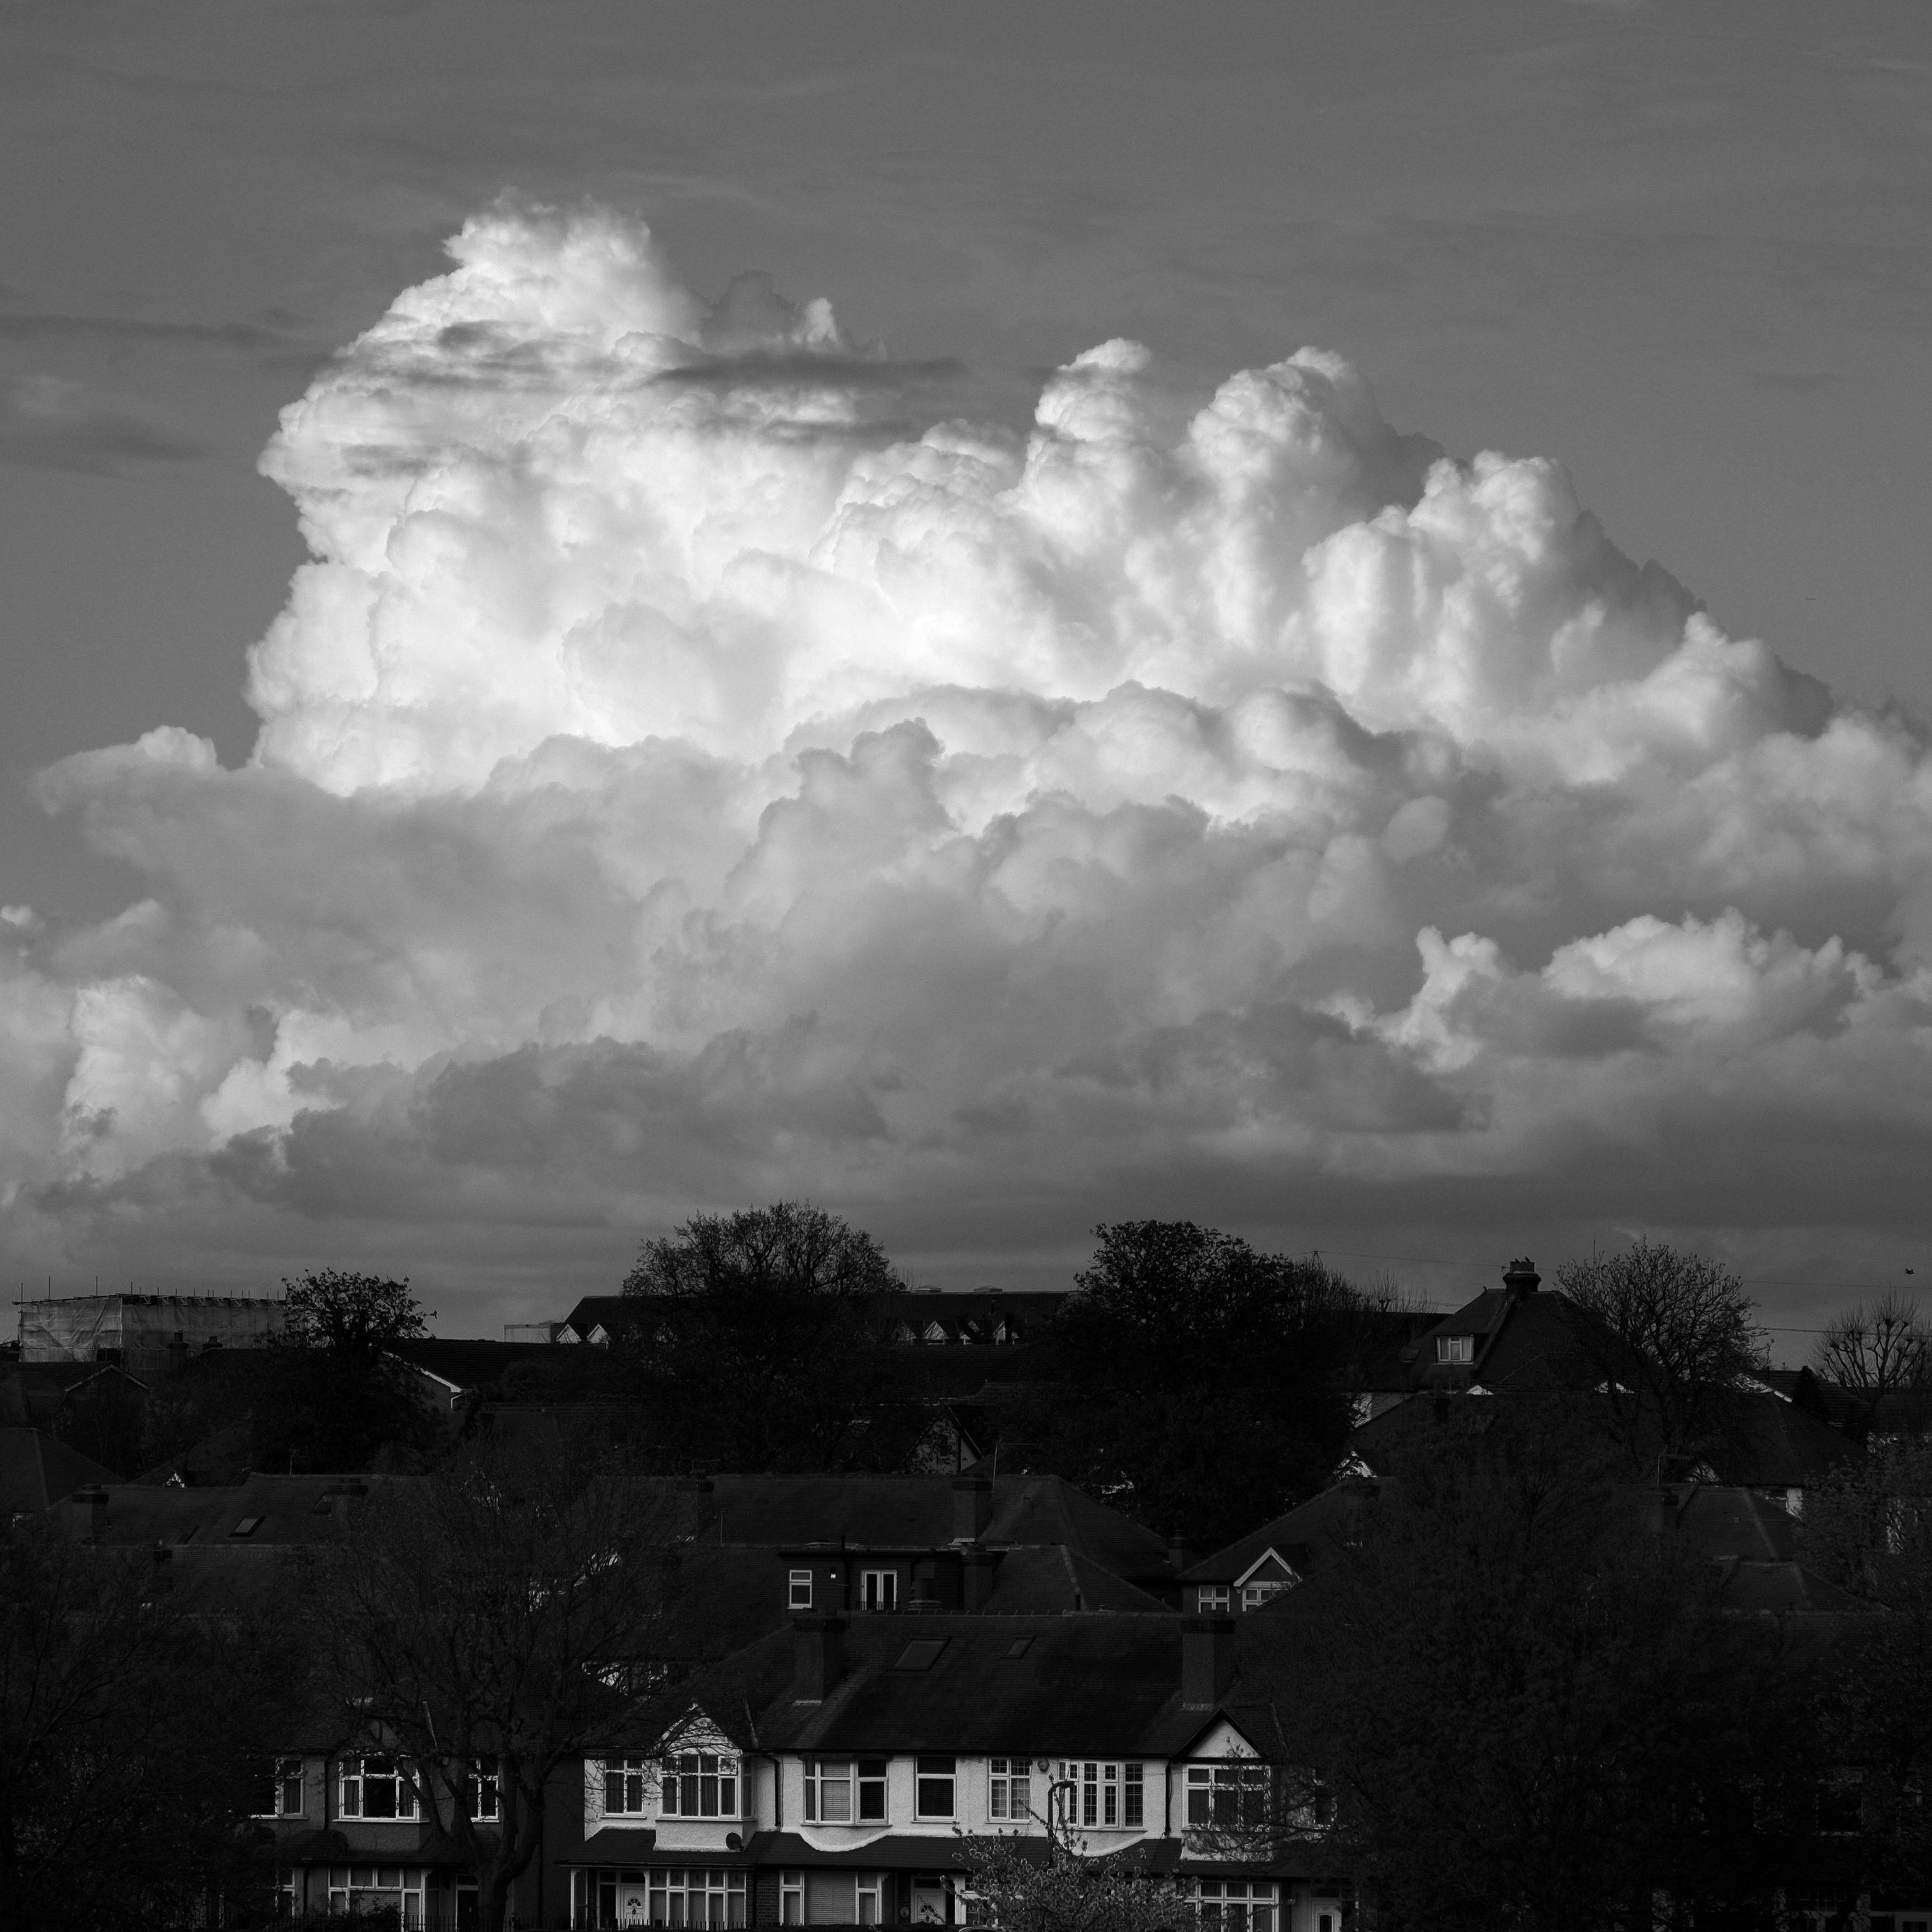 Suburban houses with dramatic white clouds overhead